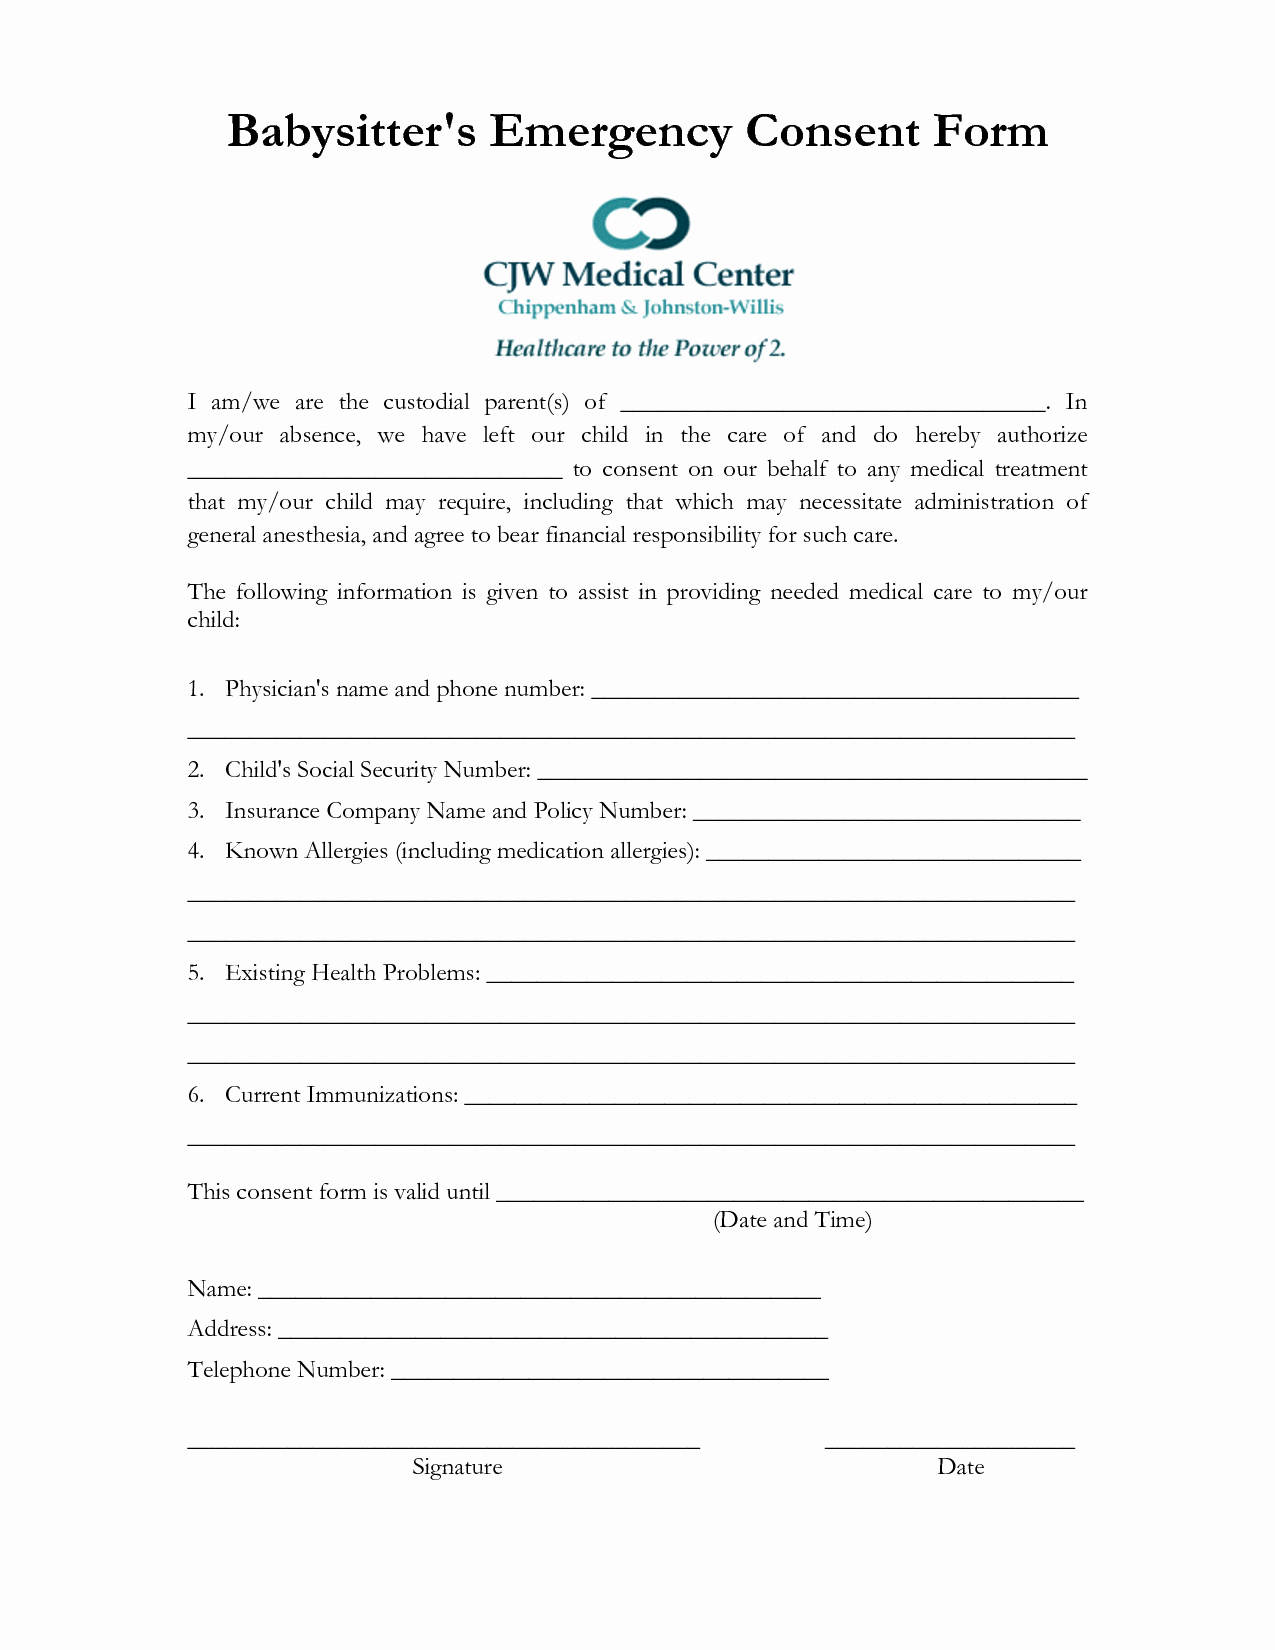 Medical Release form for Babysitter New Babysitting forms Reverse Search